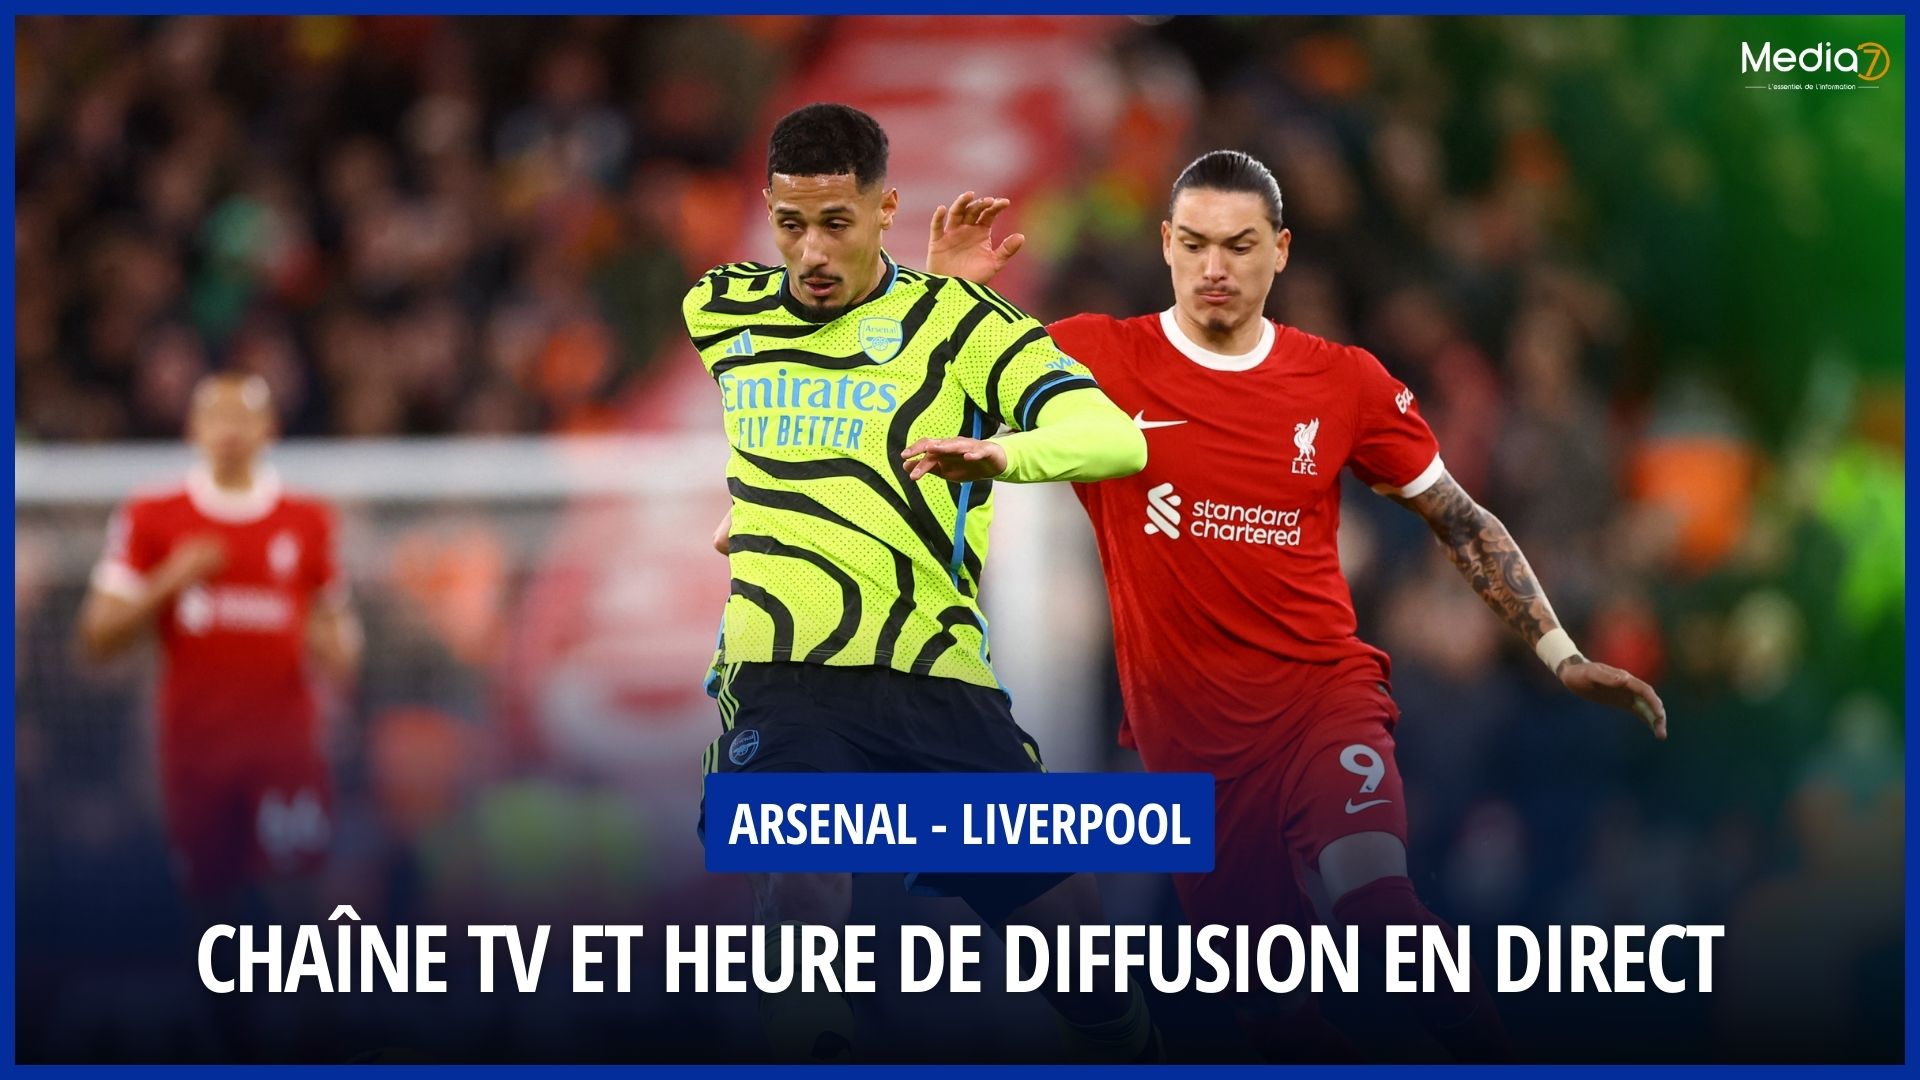 Follow the Arsenal – Liverpool Match Live: On Which TV & Streaming Channel? At what time ? - Media7